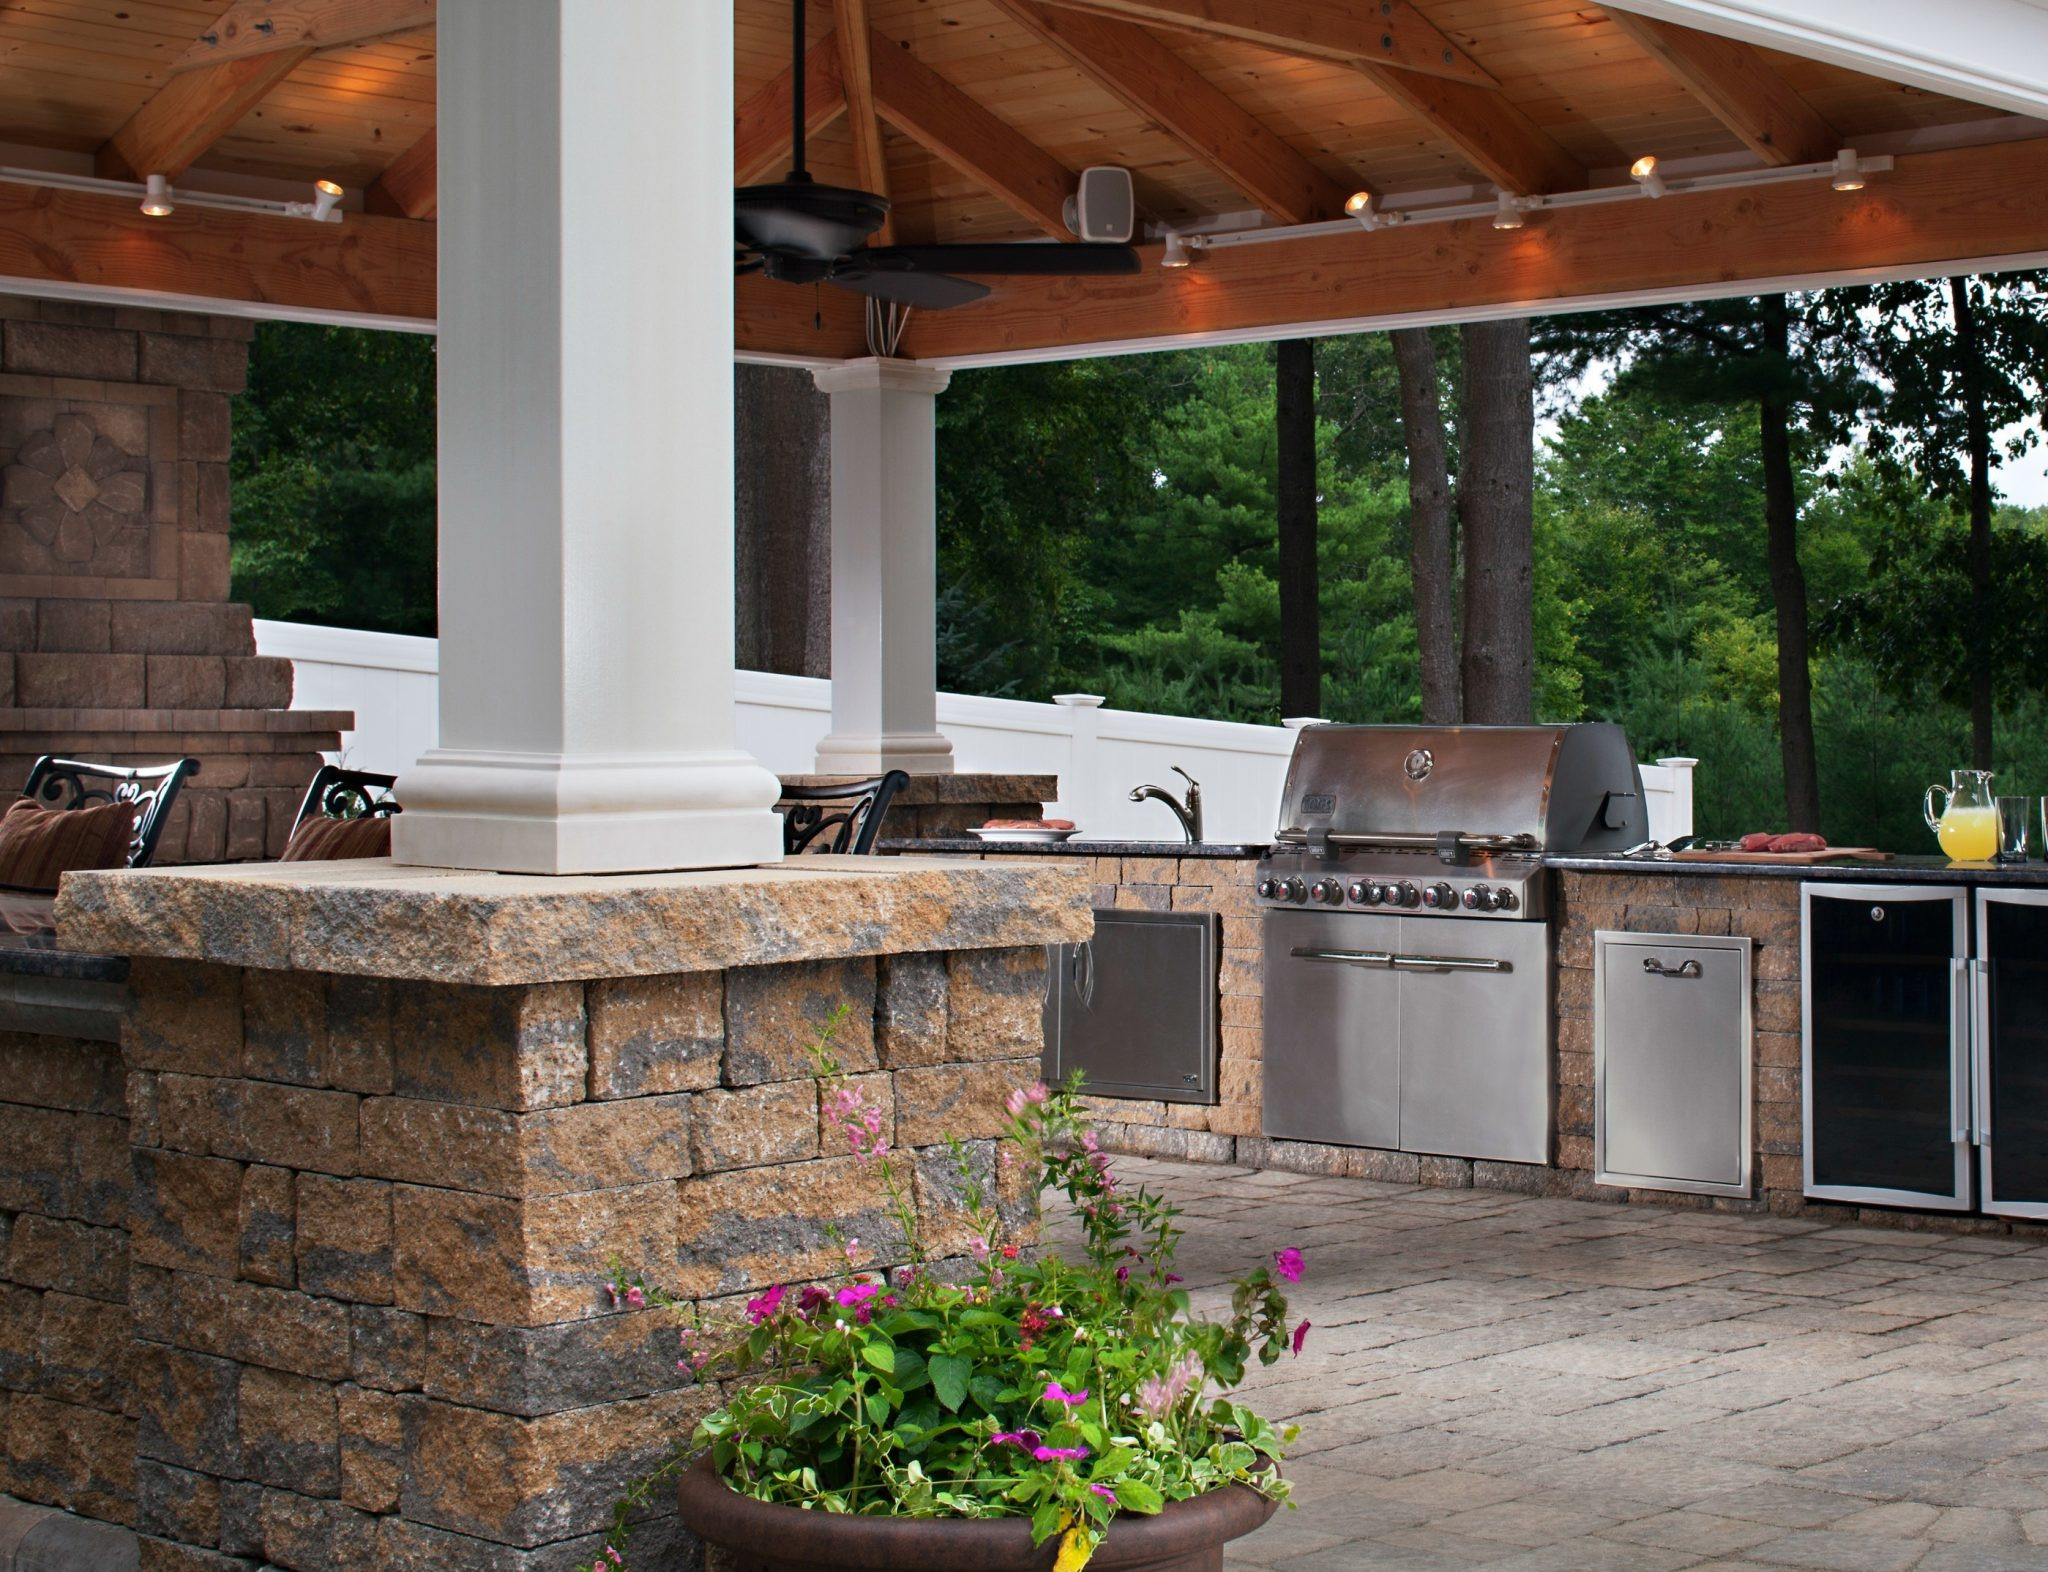 Outdoor Kitchen and Patio Elegant Outdoor Kitchen Trends 9 Hot Ideas for Your Backyard